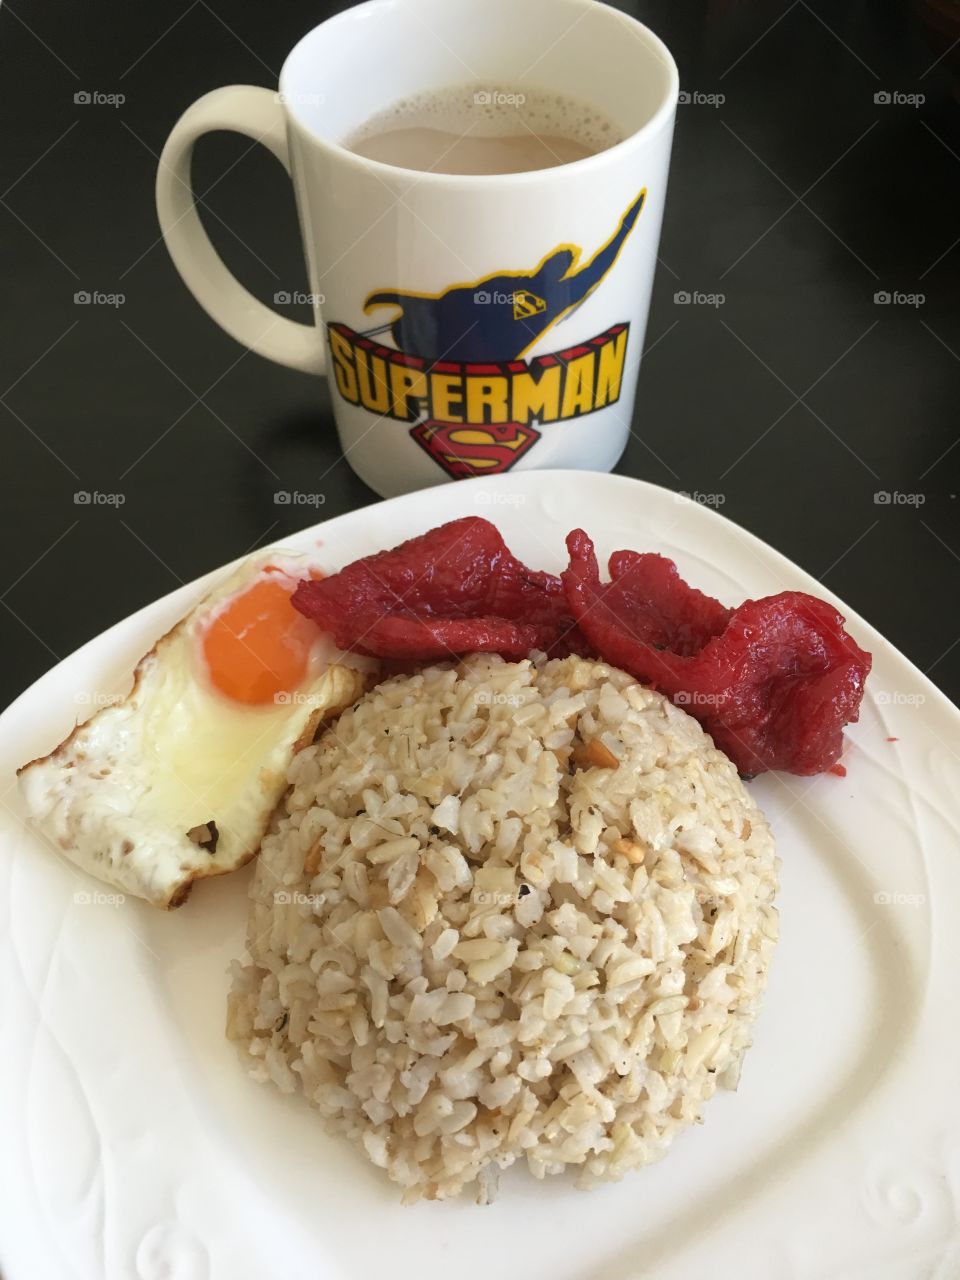 Fried rice, egg and tocino